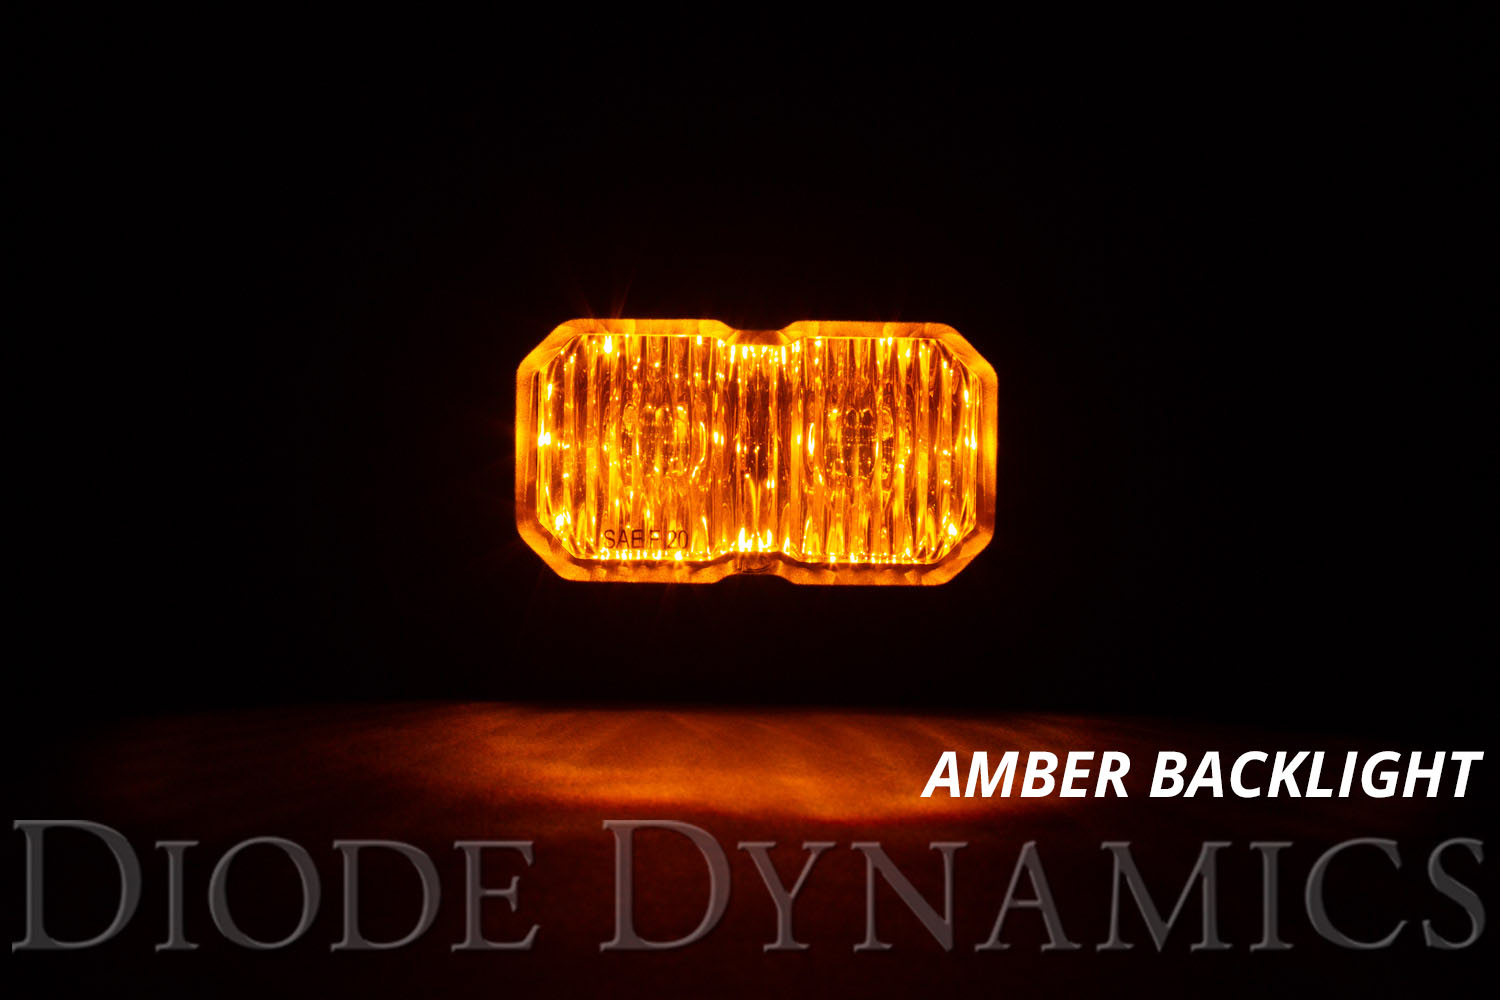 Diode Dynamics Stage Series 2 Inch LED Pod, Pro Yellow Flood Flush ABL Each